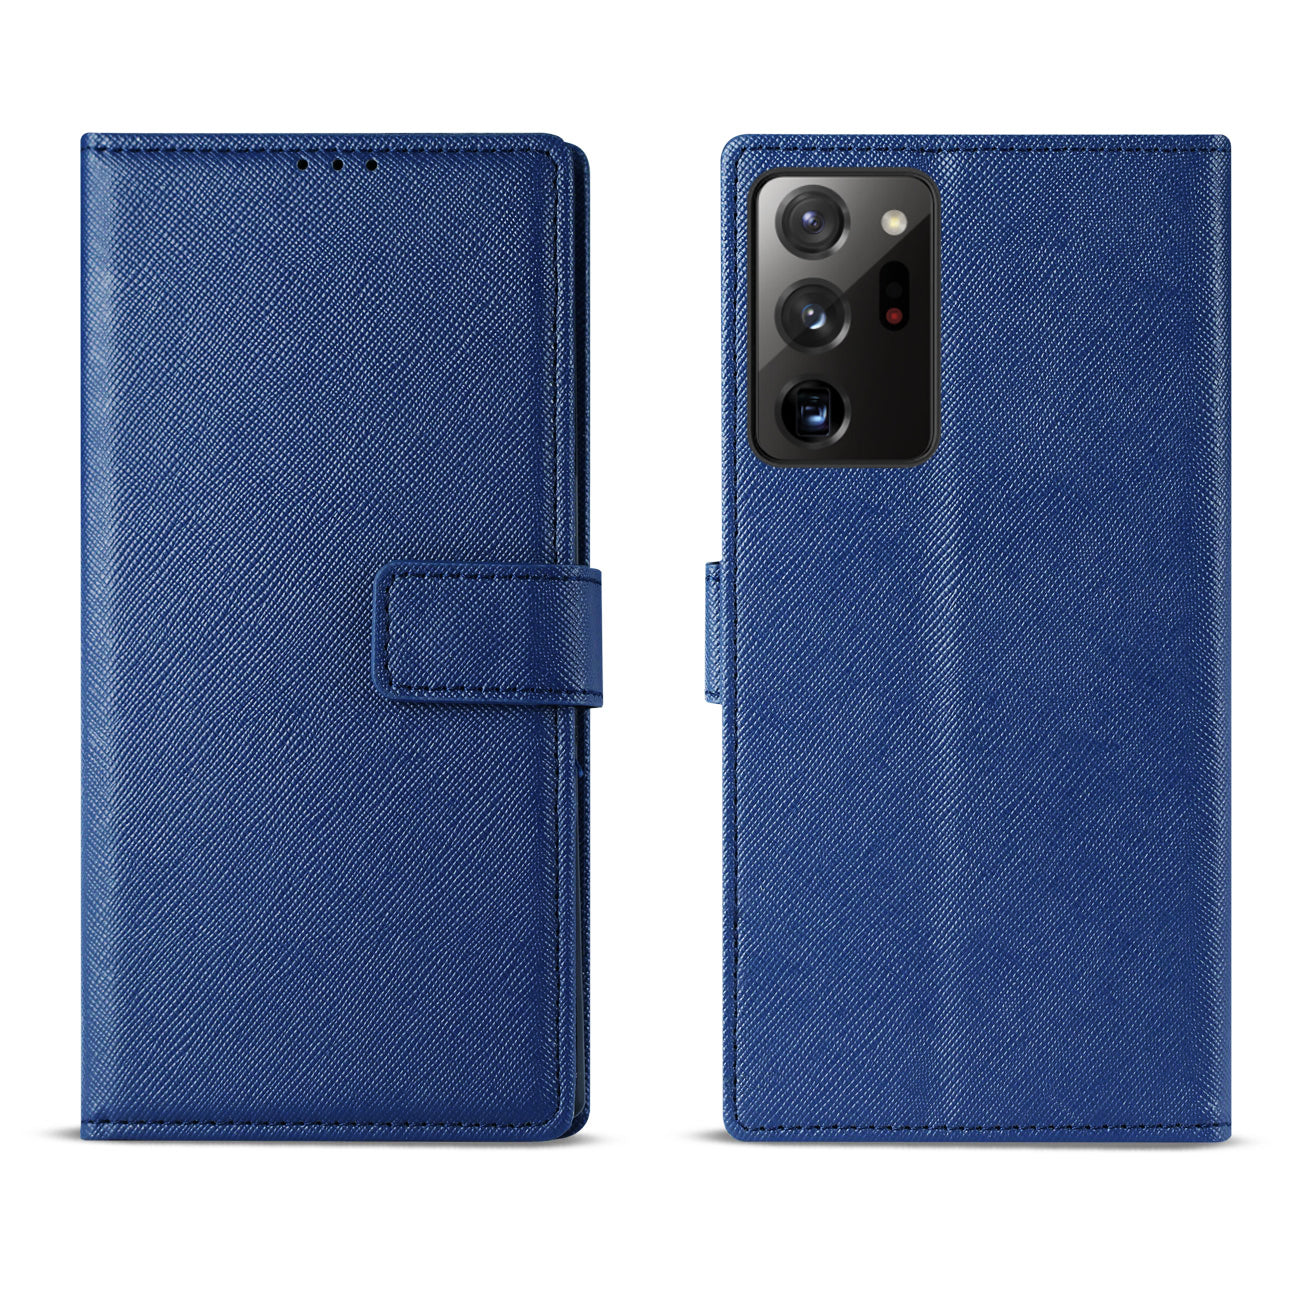 Case Slim Stand with Card Slots Samsung Galaxy Note 20 Ultra Blue Color